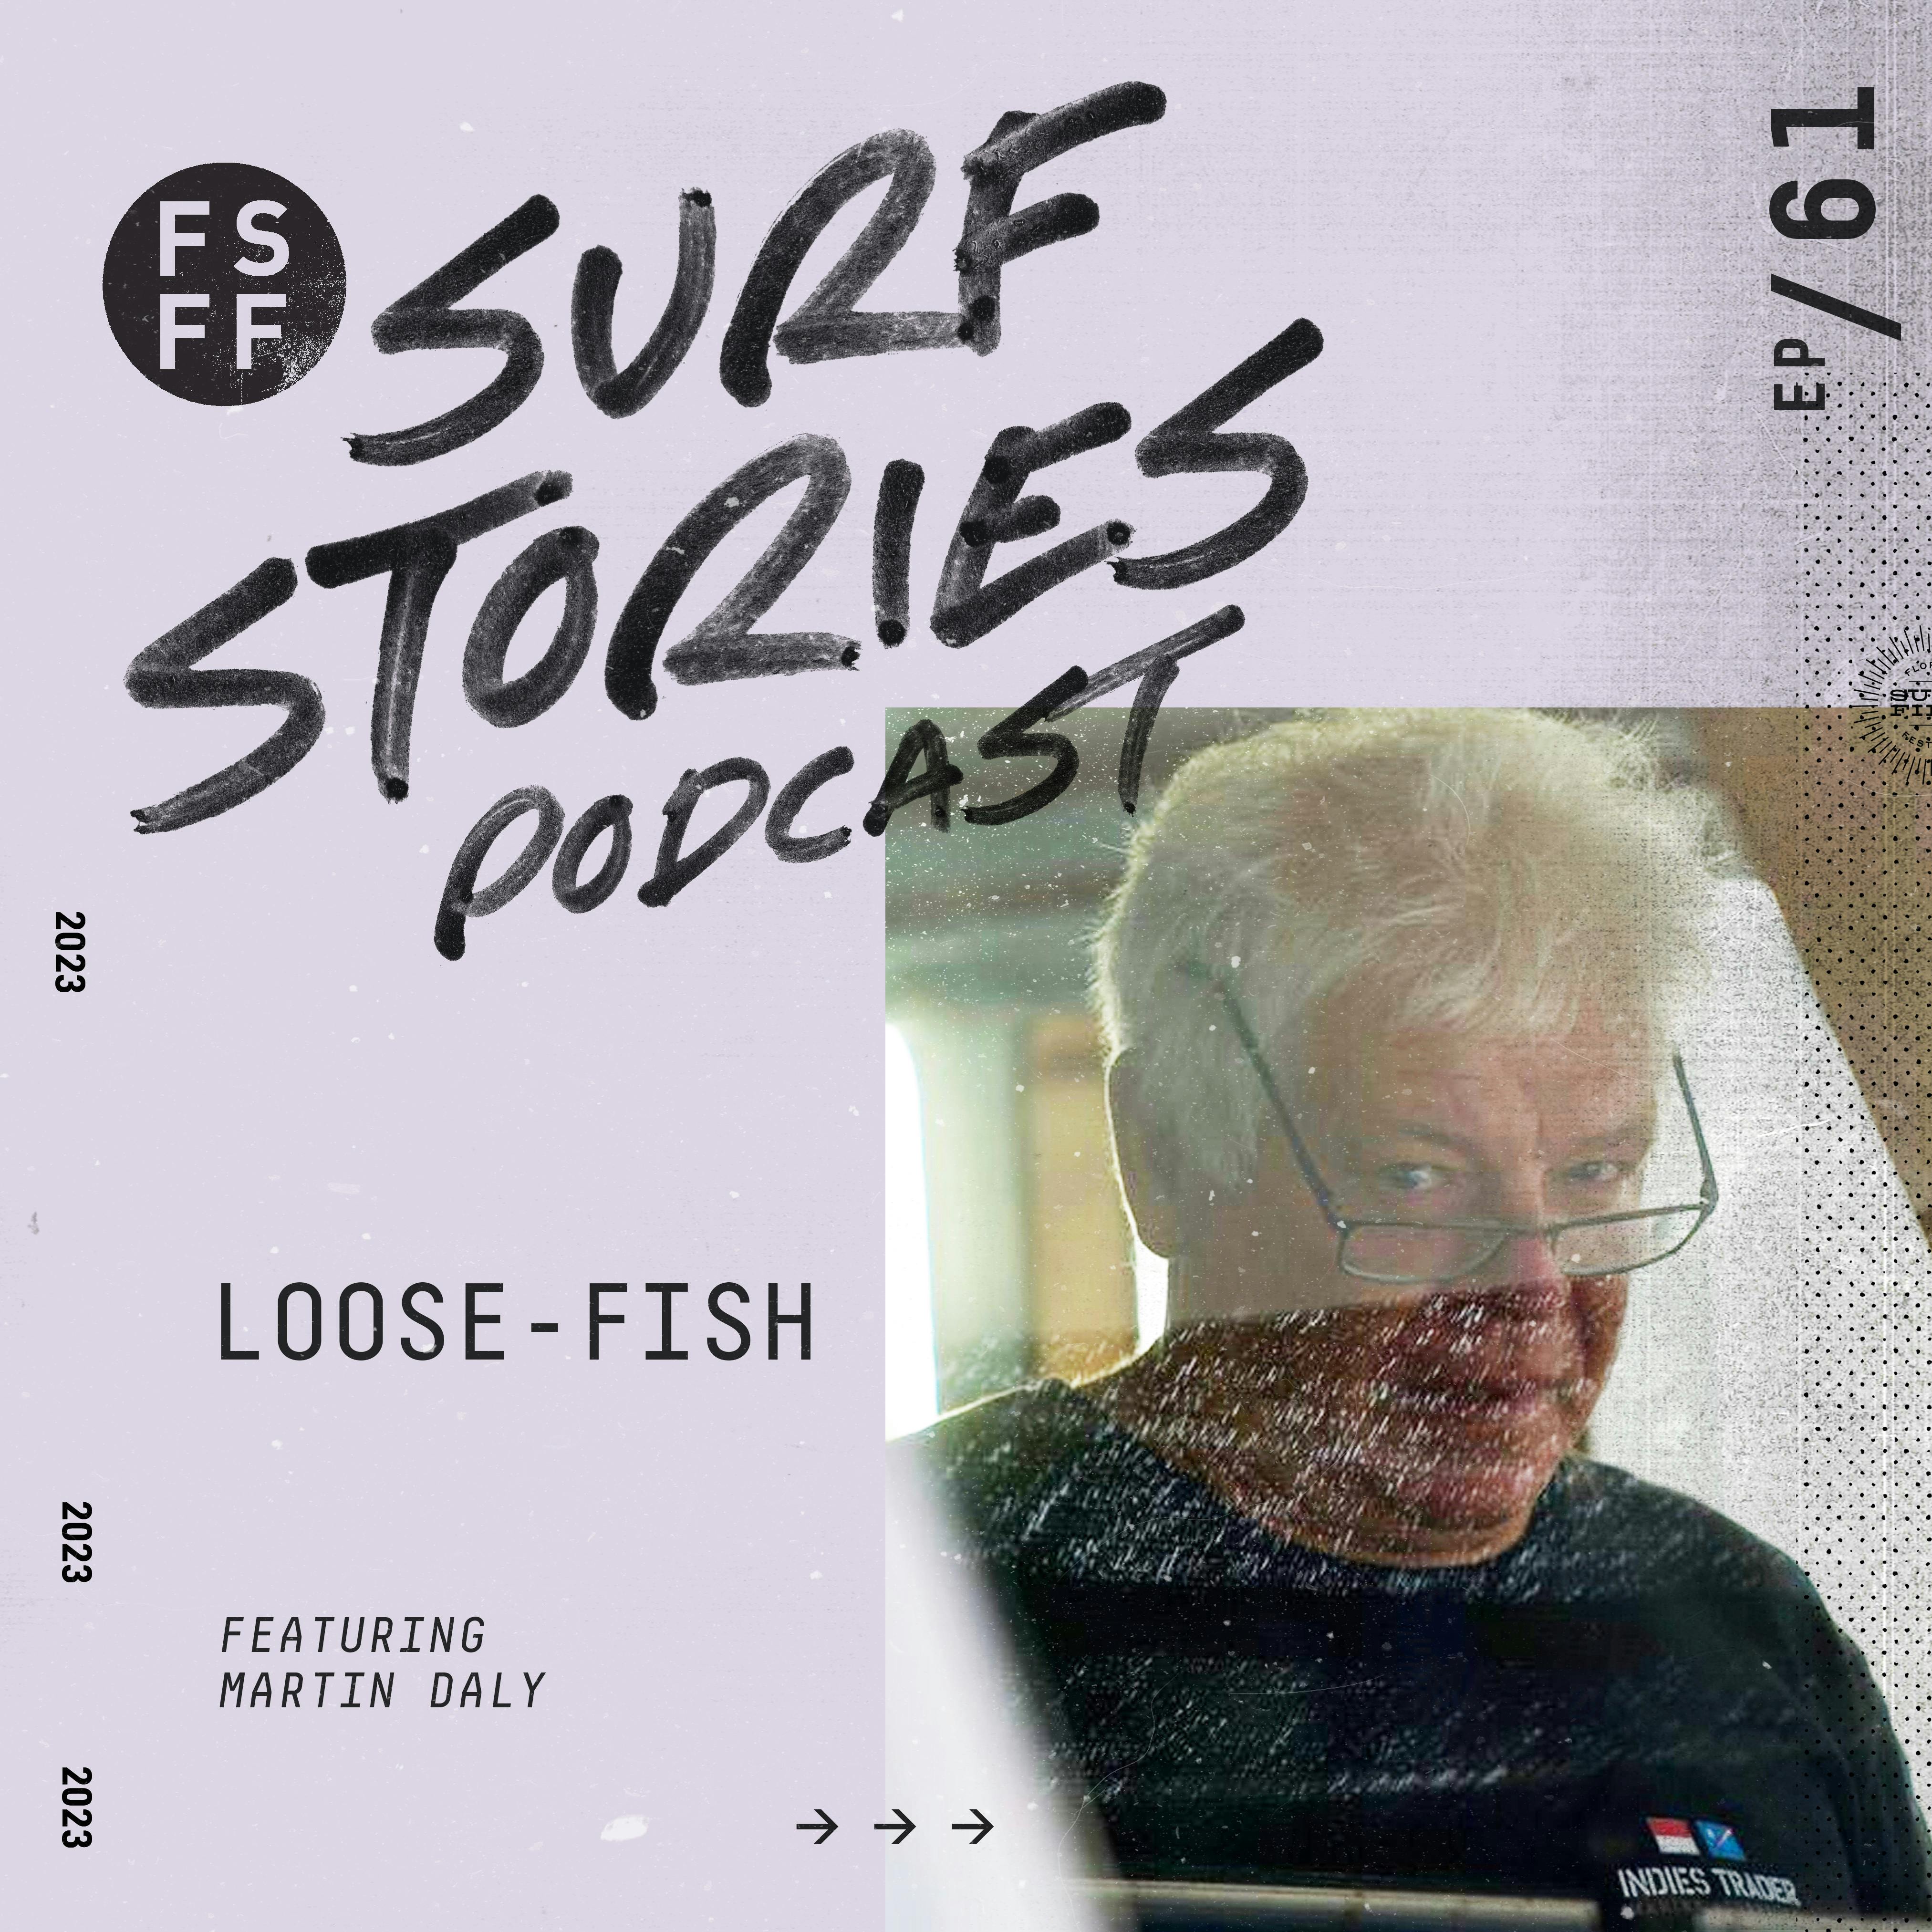 Loose-Fish with Martin Daly